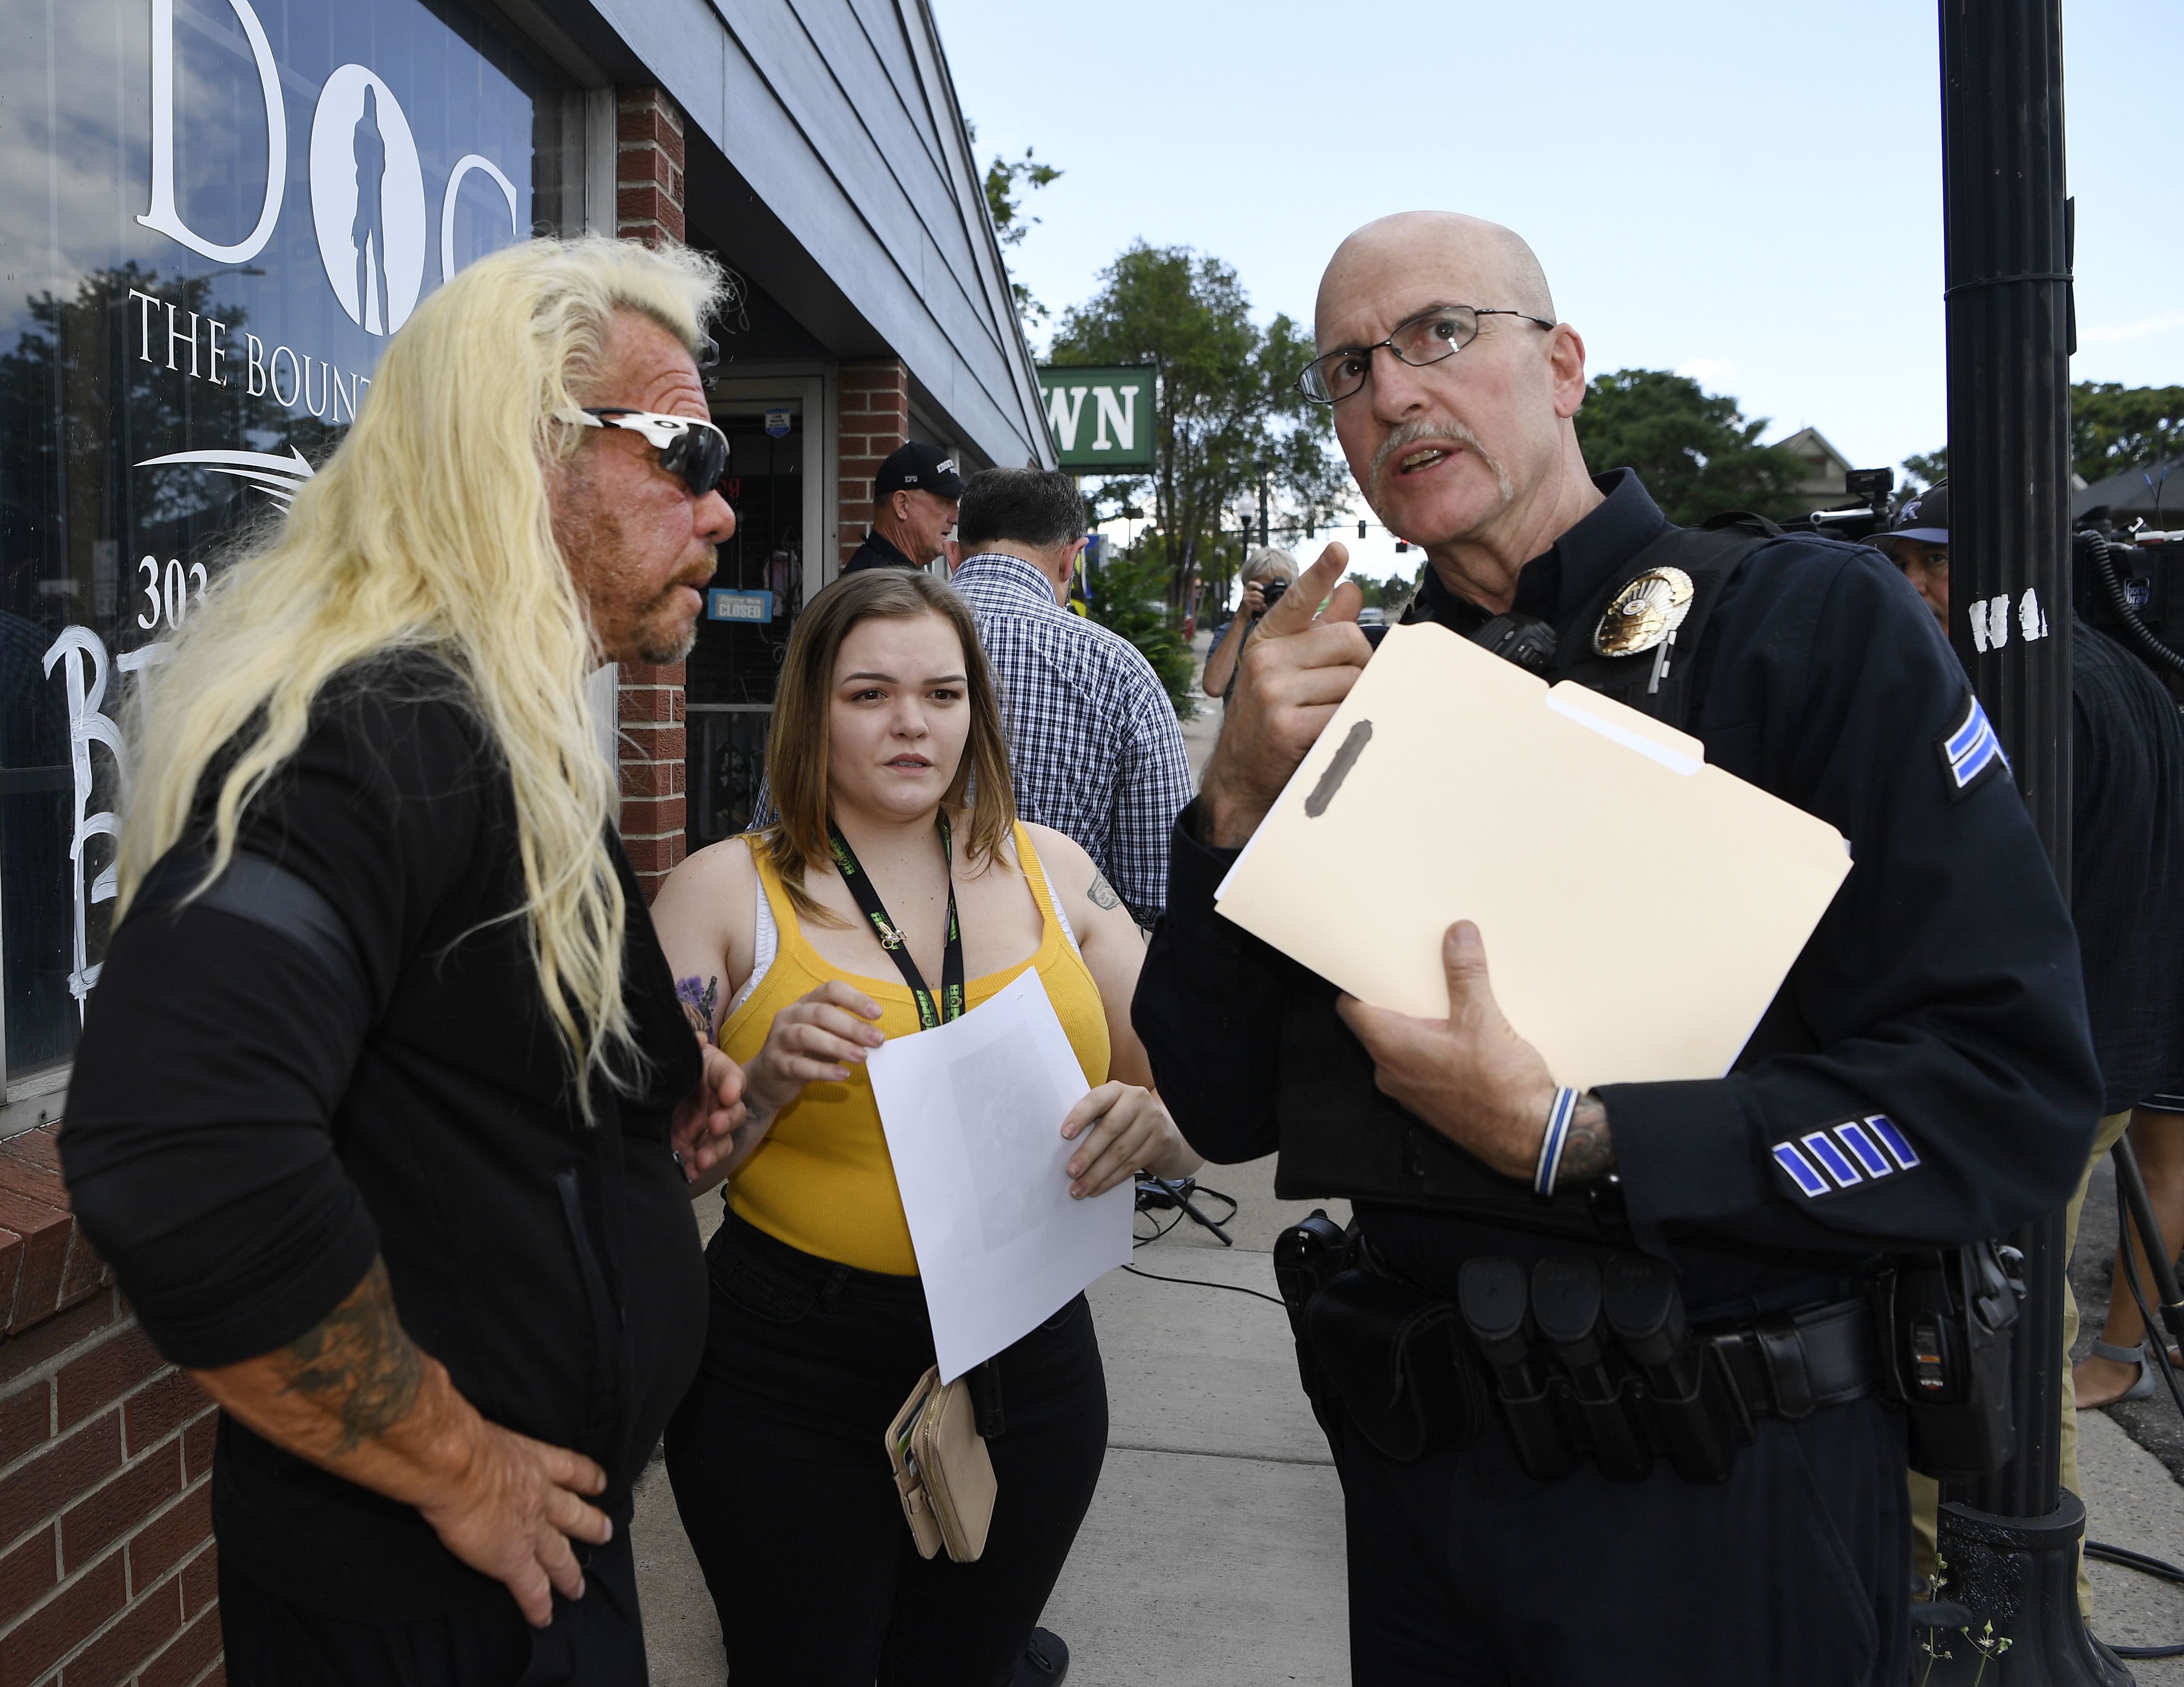 Duane "Dog the Bounty Hunter" Chapman and his daughter Bonnie Chapman at a press conference in front of his Colorado store on Aug. 2, to address the theft there. (Photo: Andy Cross/MediaNews Group/The Denver Post via Getty Images)